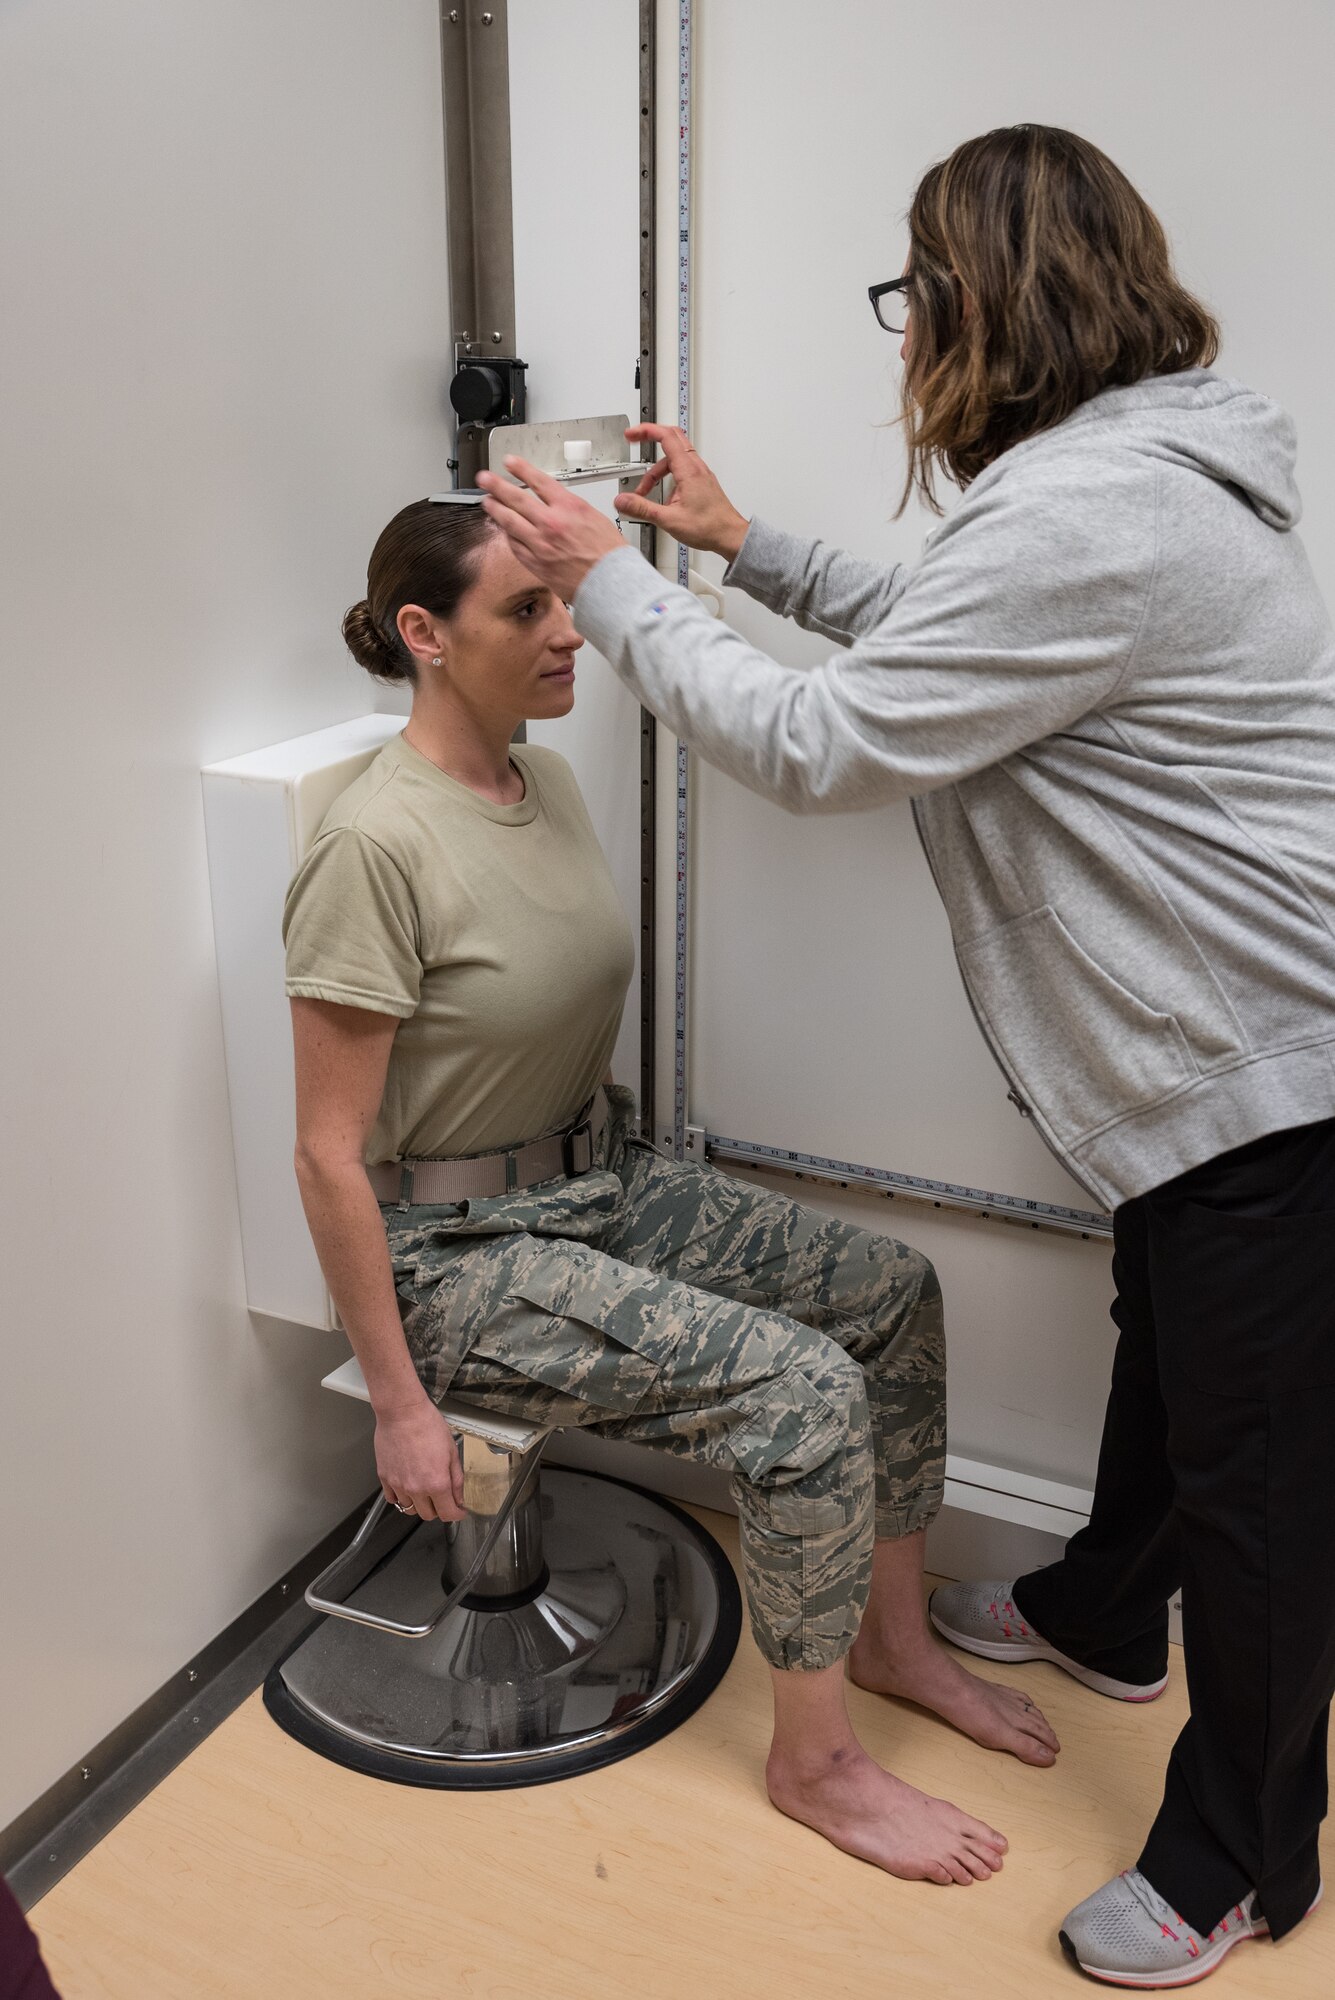 Jessica Barker, an aeromedical technician at the U.S. Air Force School of Aerospace Medicine, measures the sitting height of a pilot candidate using the only official anthropometric device for measuring those who fall outside height standards. Seven measurements are collected and uploaded into a waiver system to determine if height for each candidate is truly an eliminating factor to fly manned aircraft. (U.S. Air Force photo by Richard Eldridge)